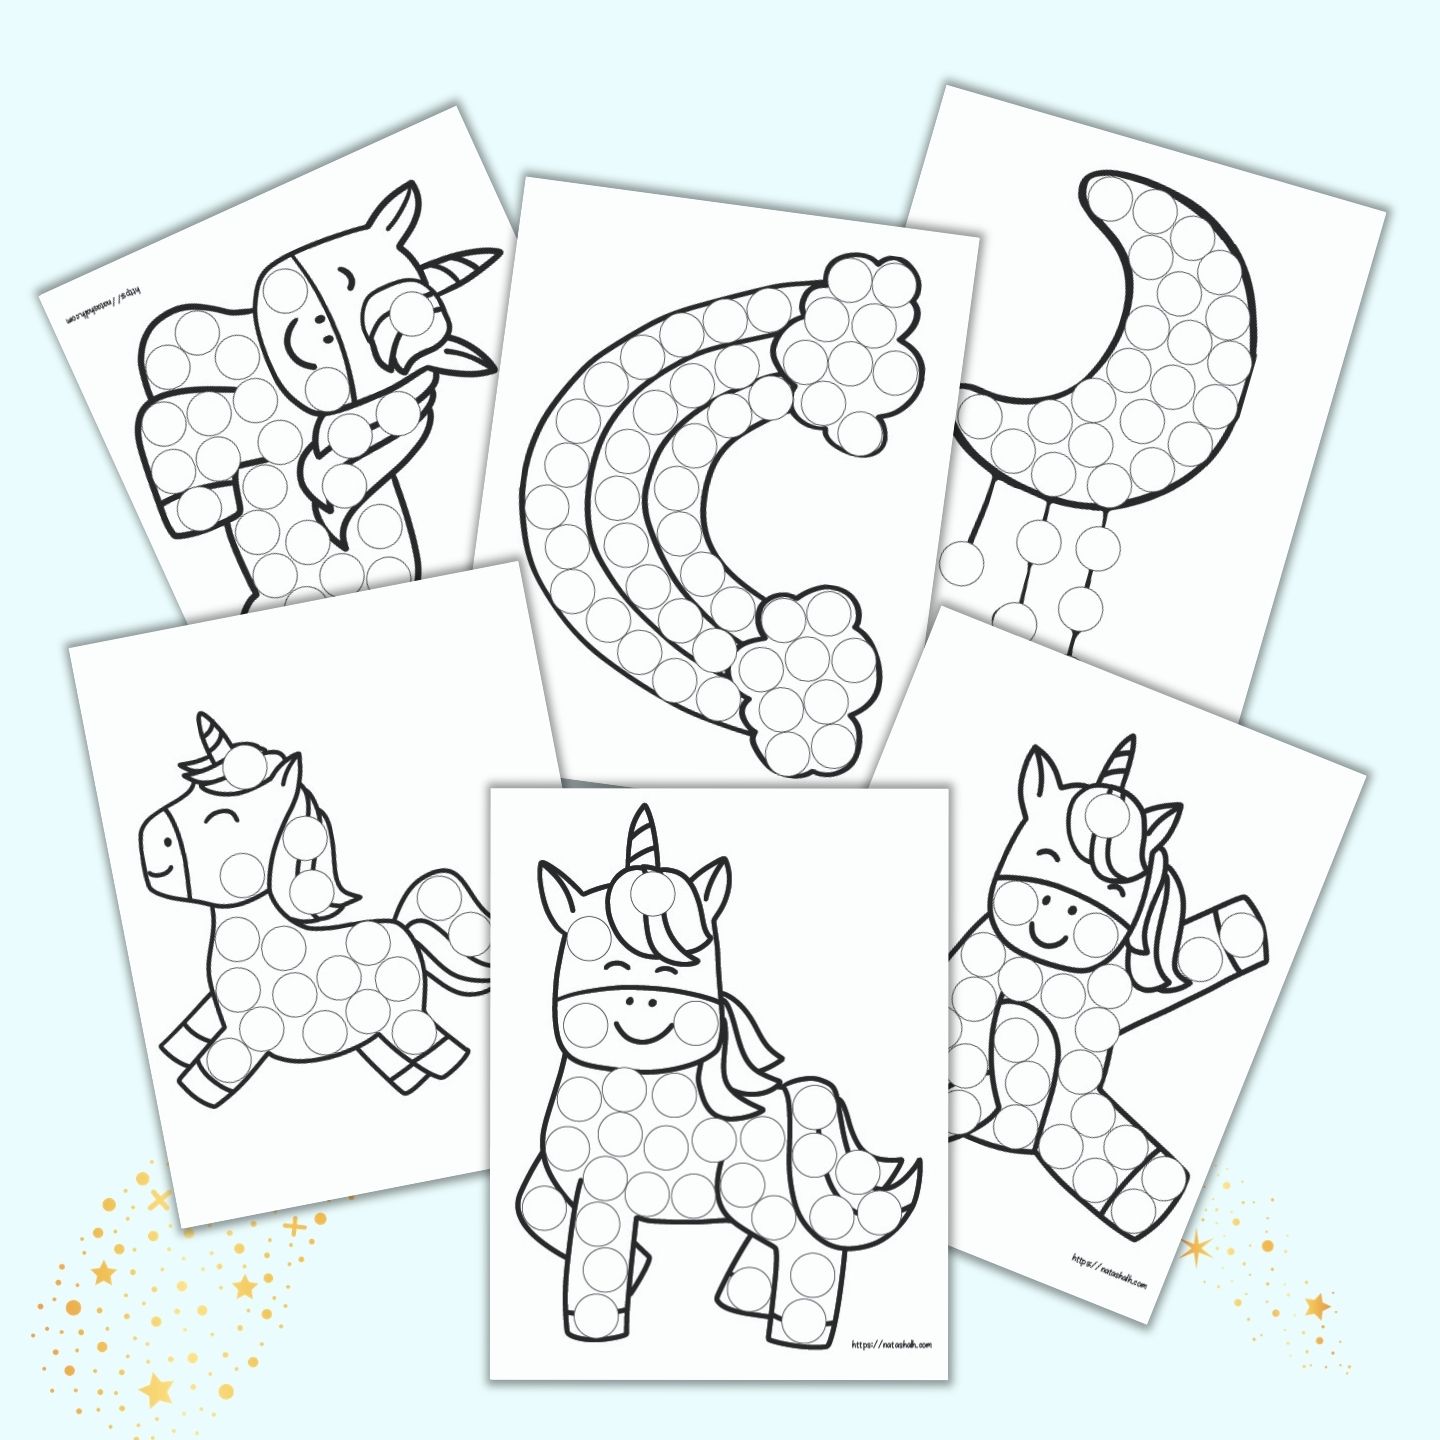 Free Printable Unicorn Do A Dot Pages No Prep Fun For Toddlers Preschoolers The Artisan Life